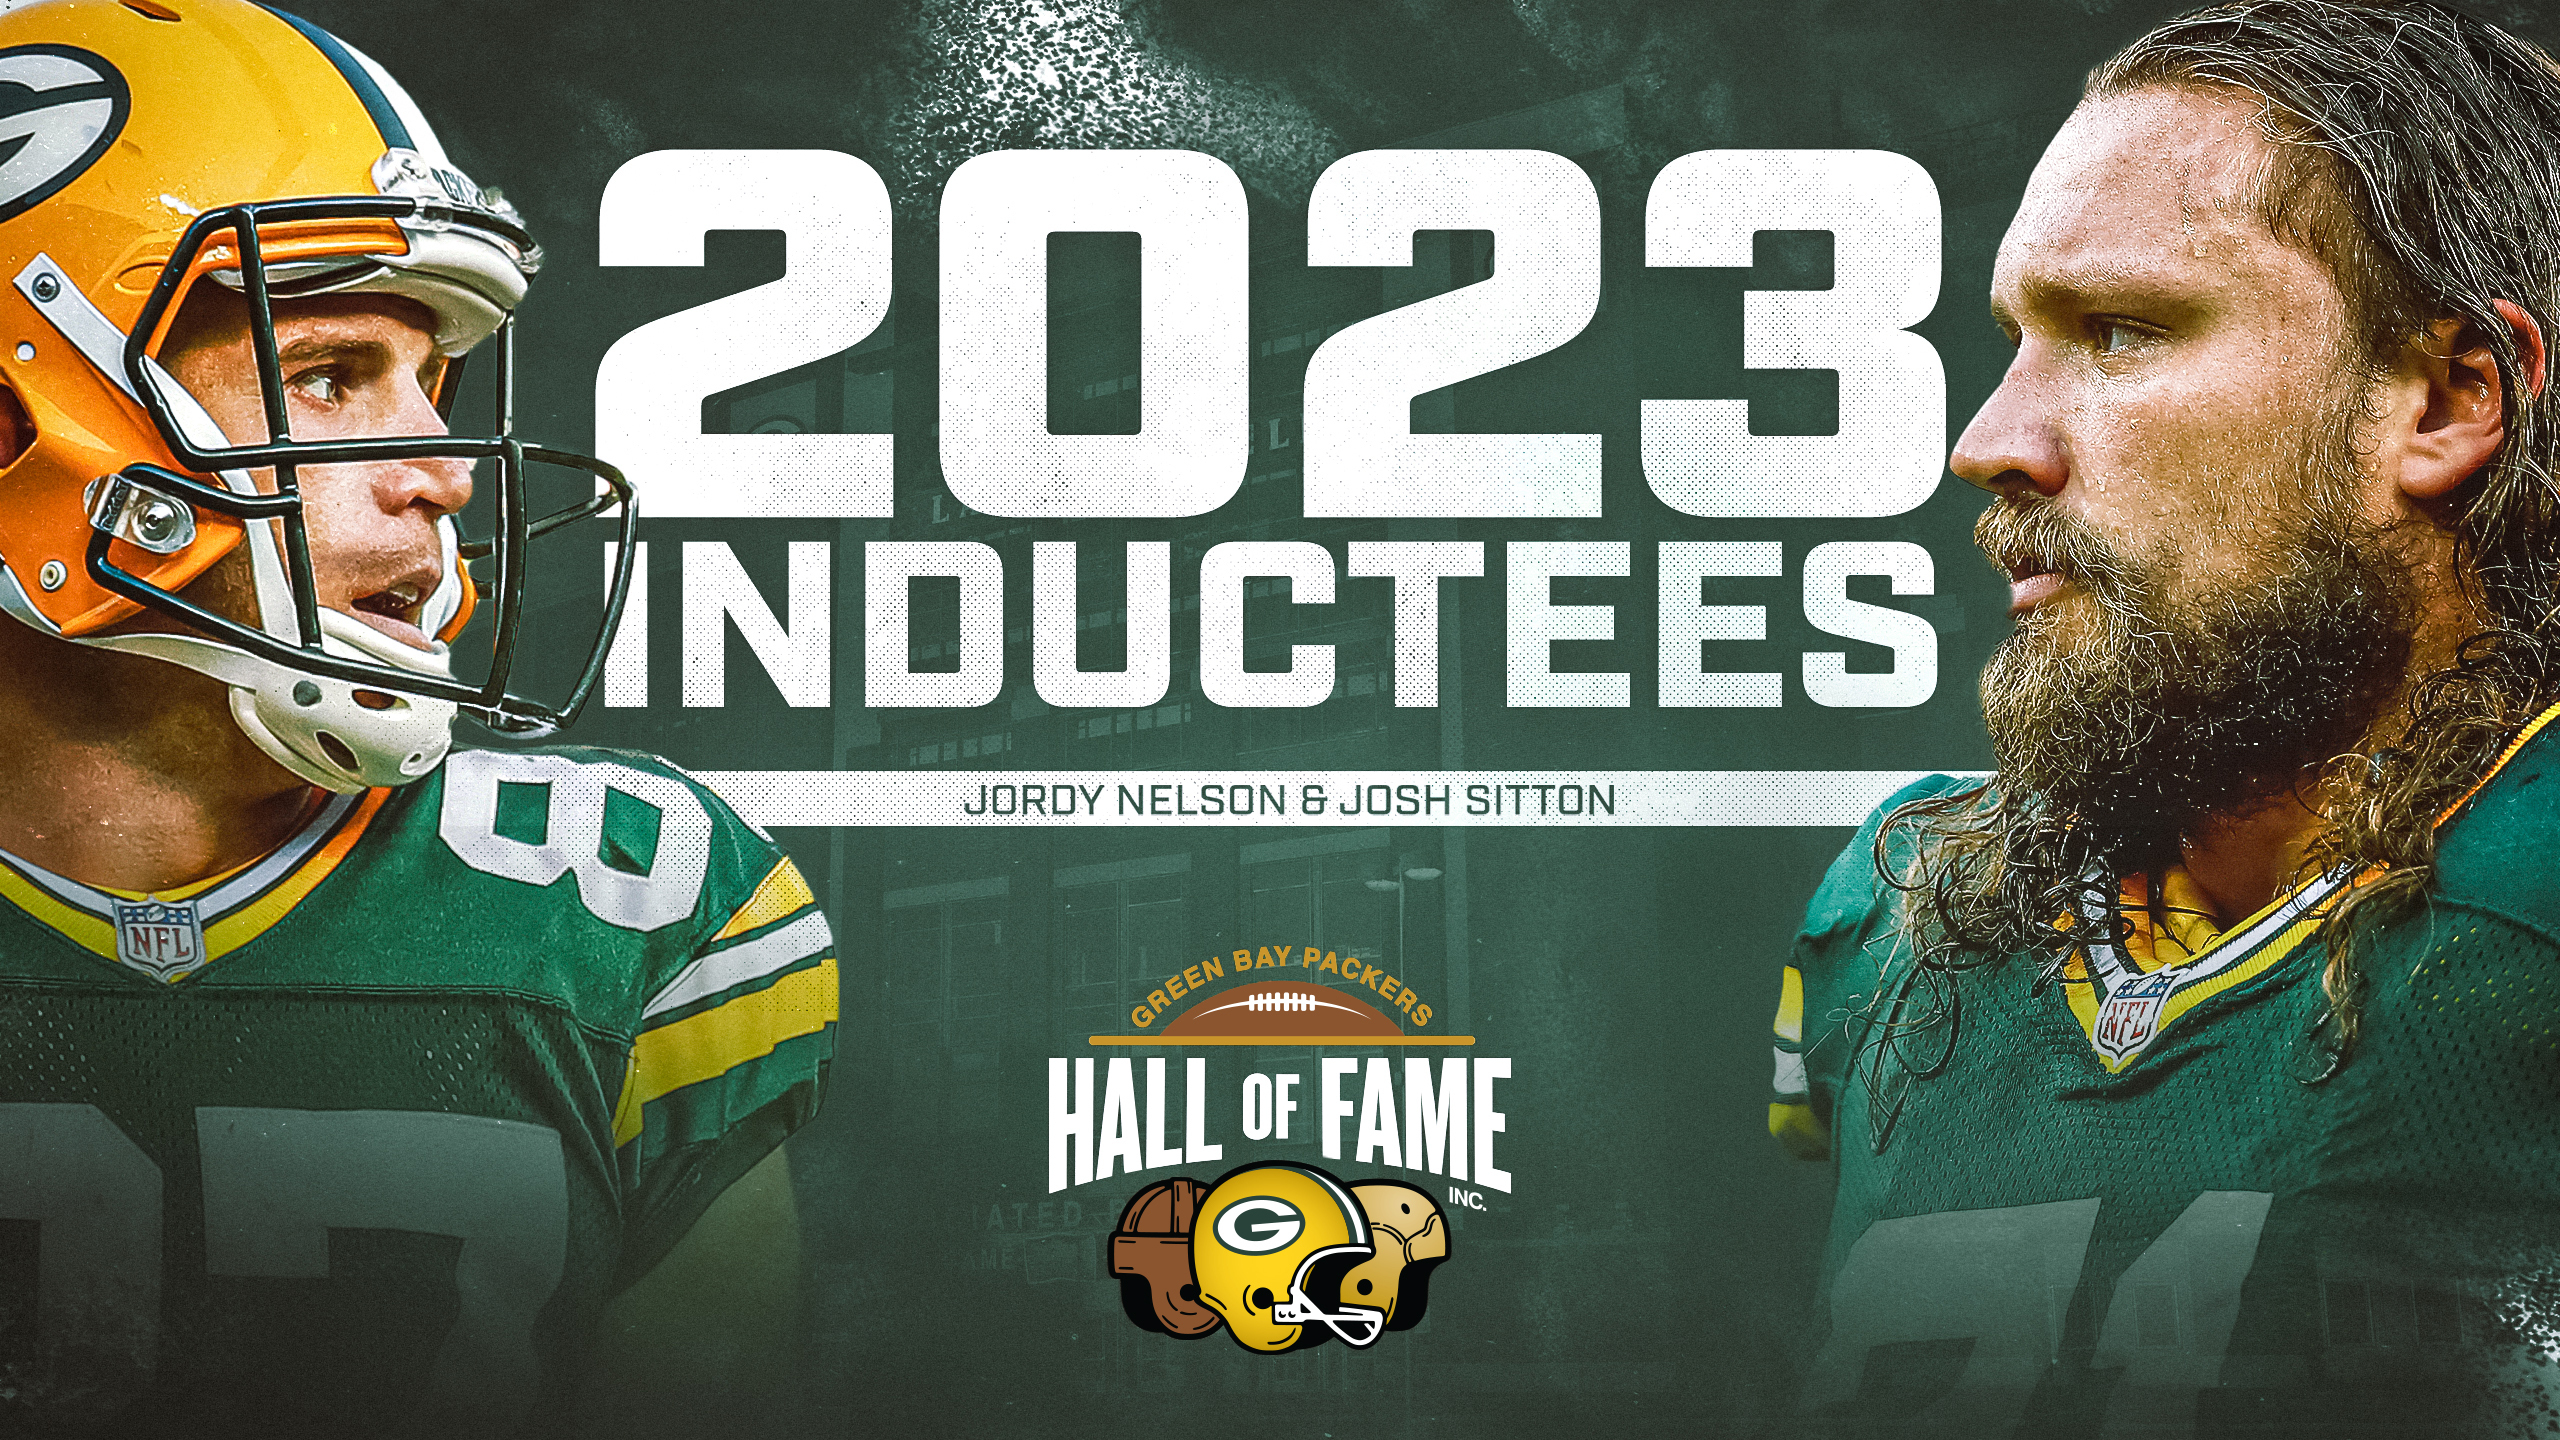 Packers Hall of Fame, Inc. Events  Green Bay Packers Hall of Fame &  Stadium Tours